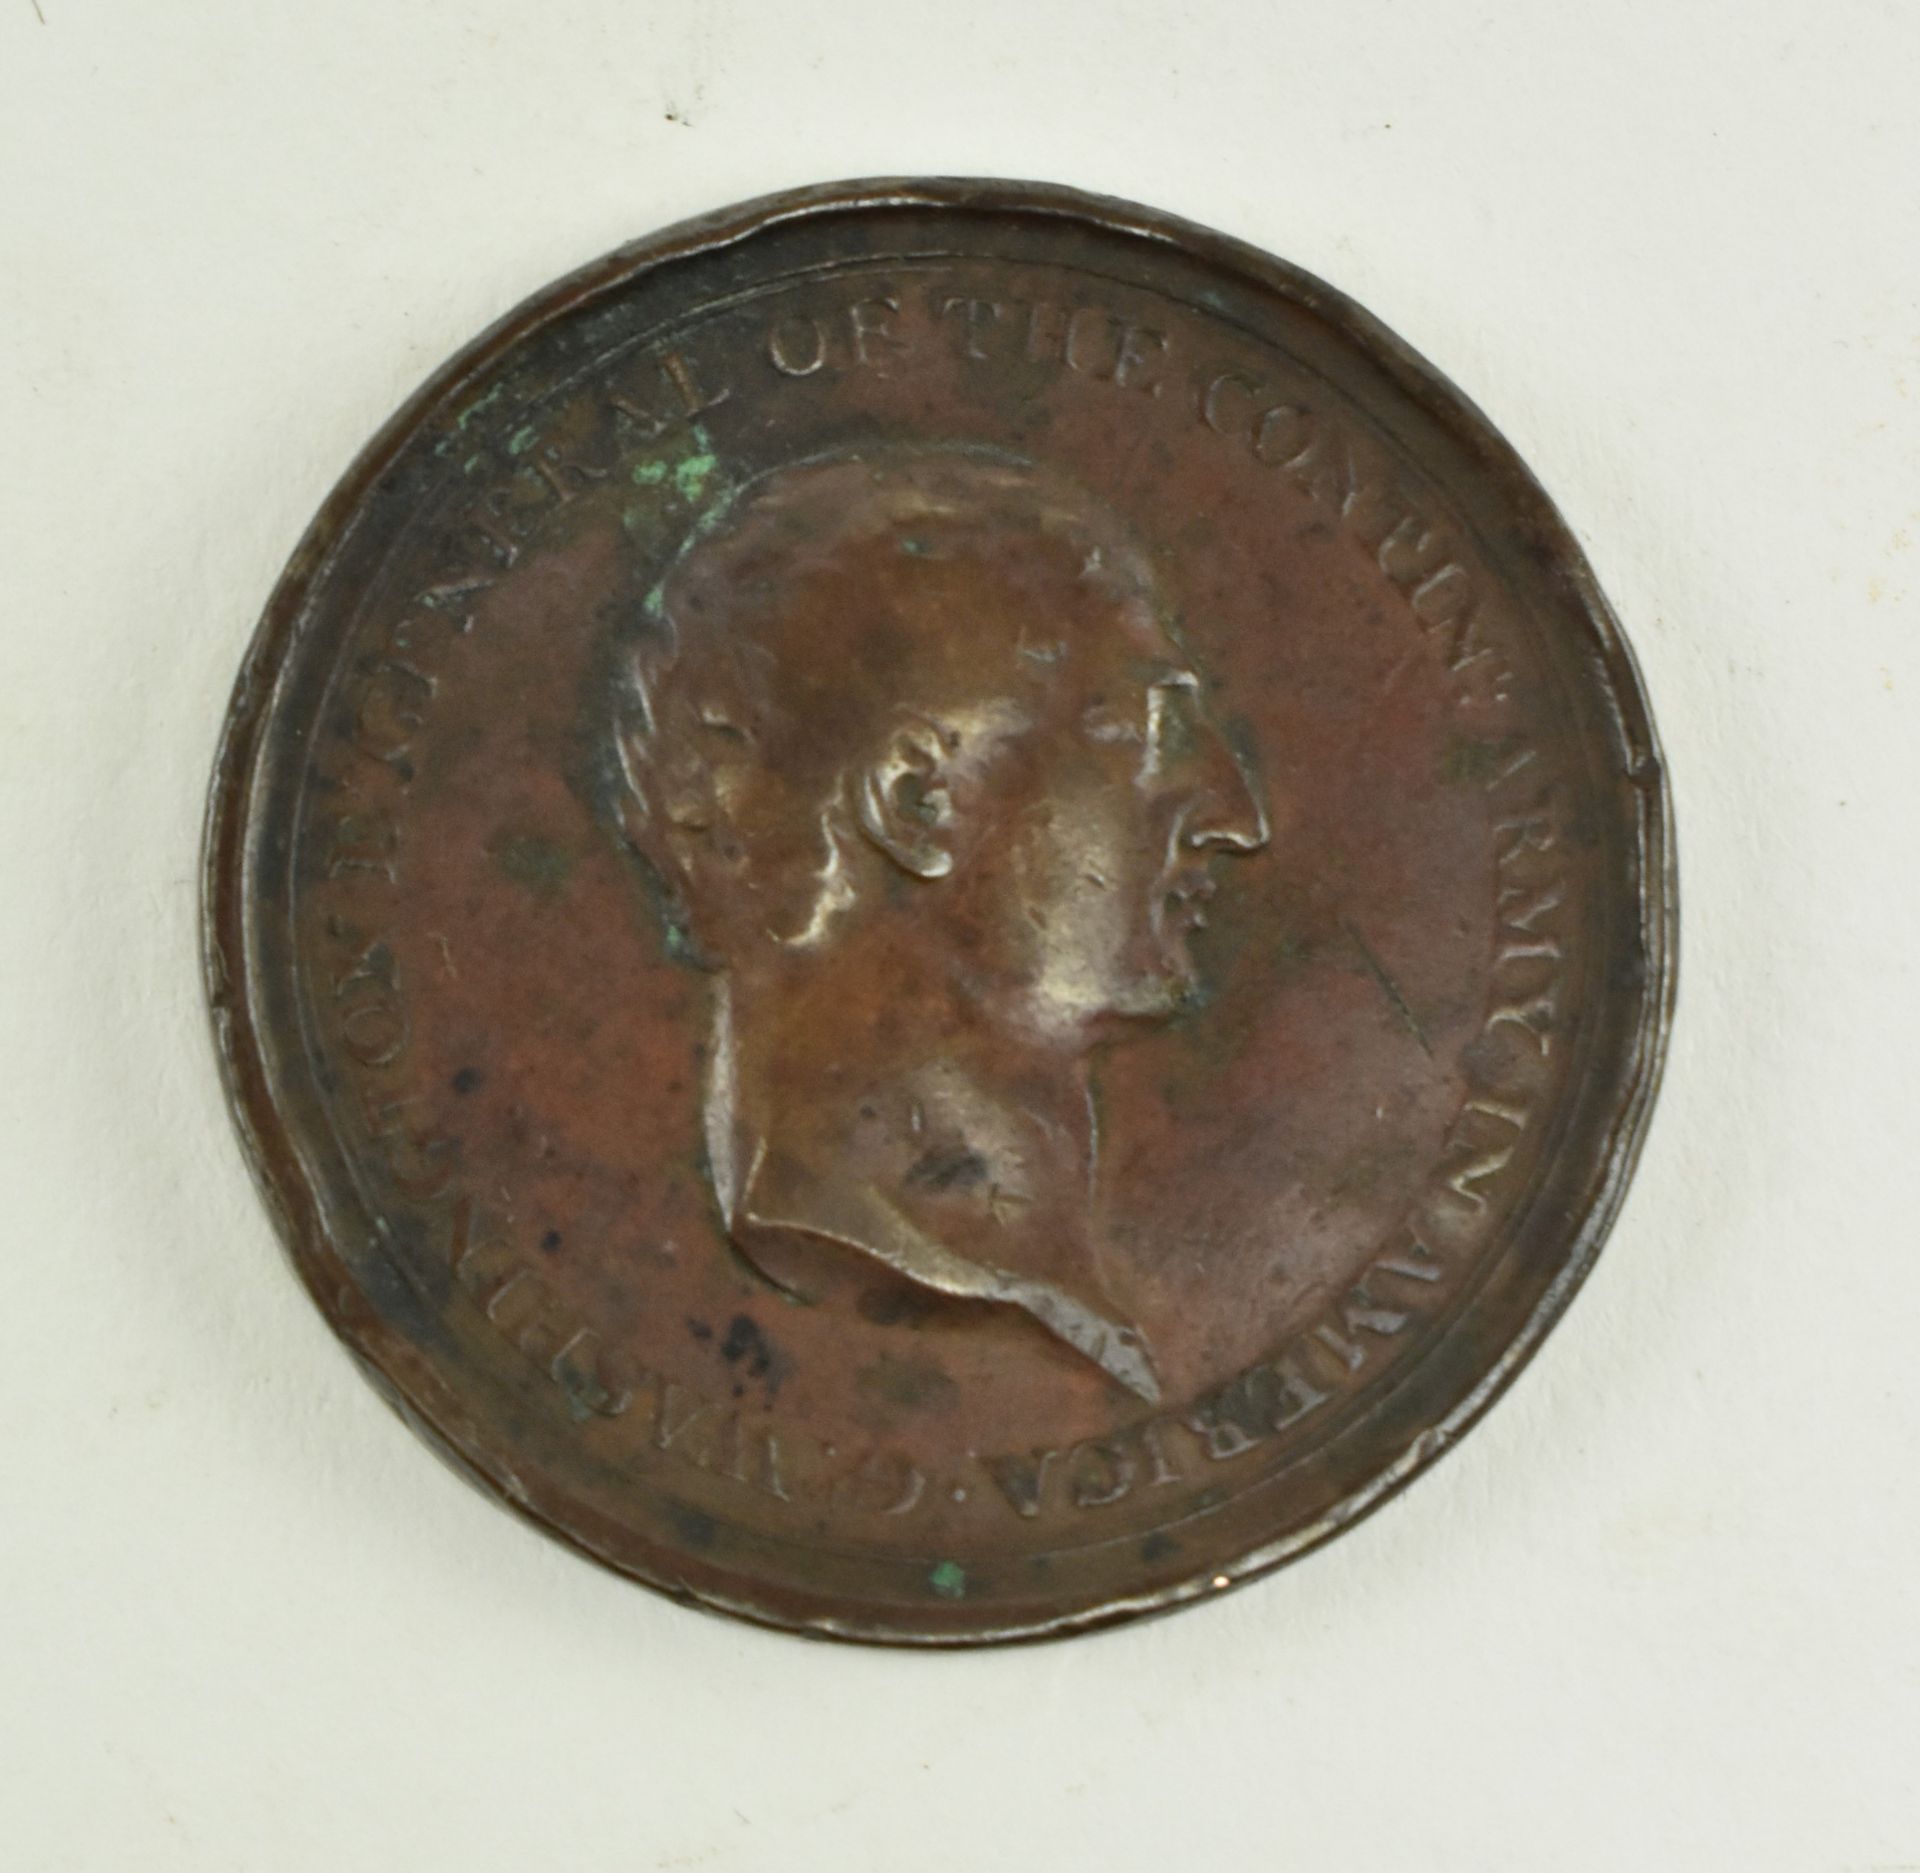 1778 GEORGE WASHINGTON VOLTAIRE MEDAL - Image 2 of 3